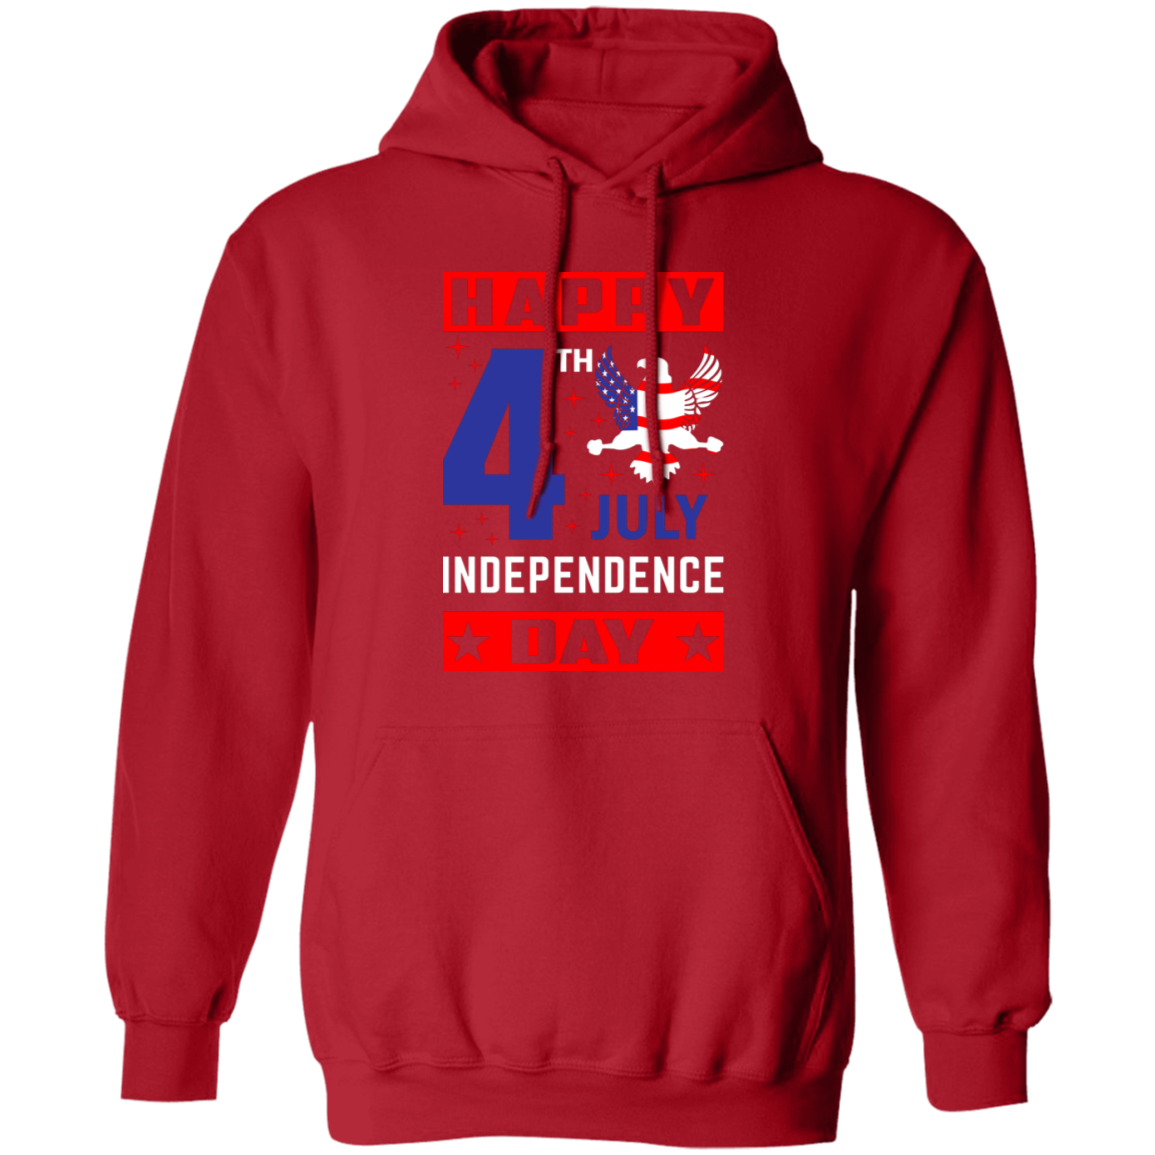 Happy 4TH OF JULY Independence Pullover Hoodie